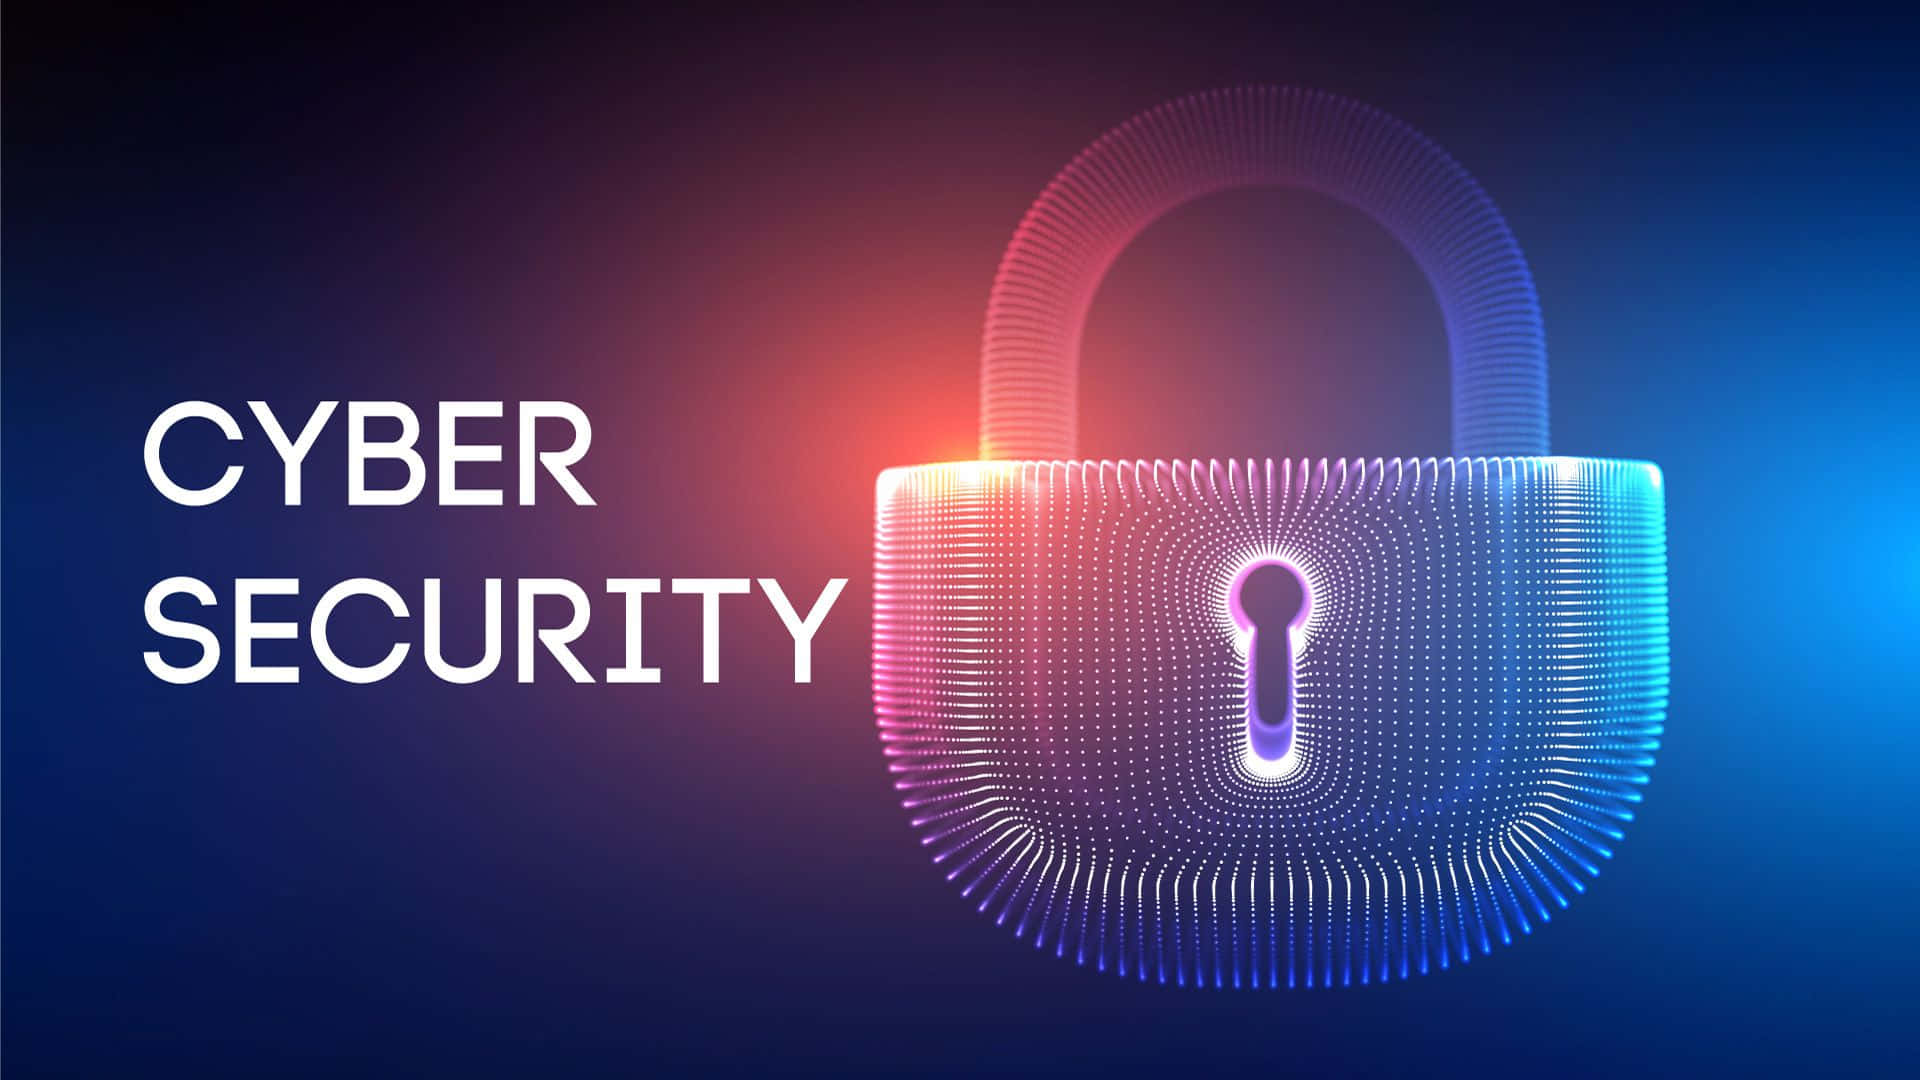 Cyber Security Background Wallpaper